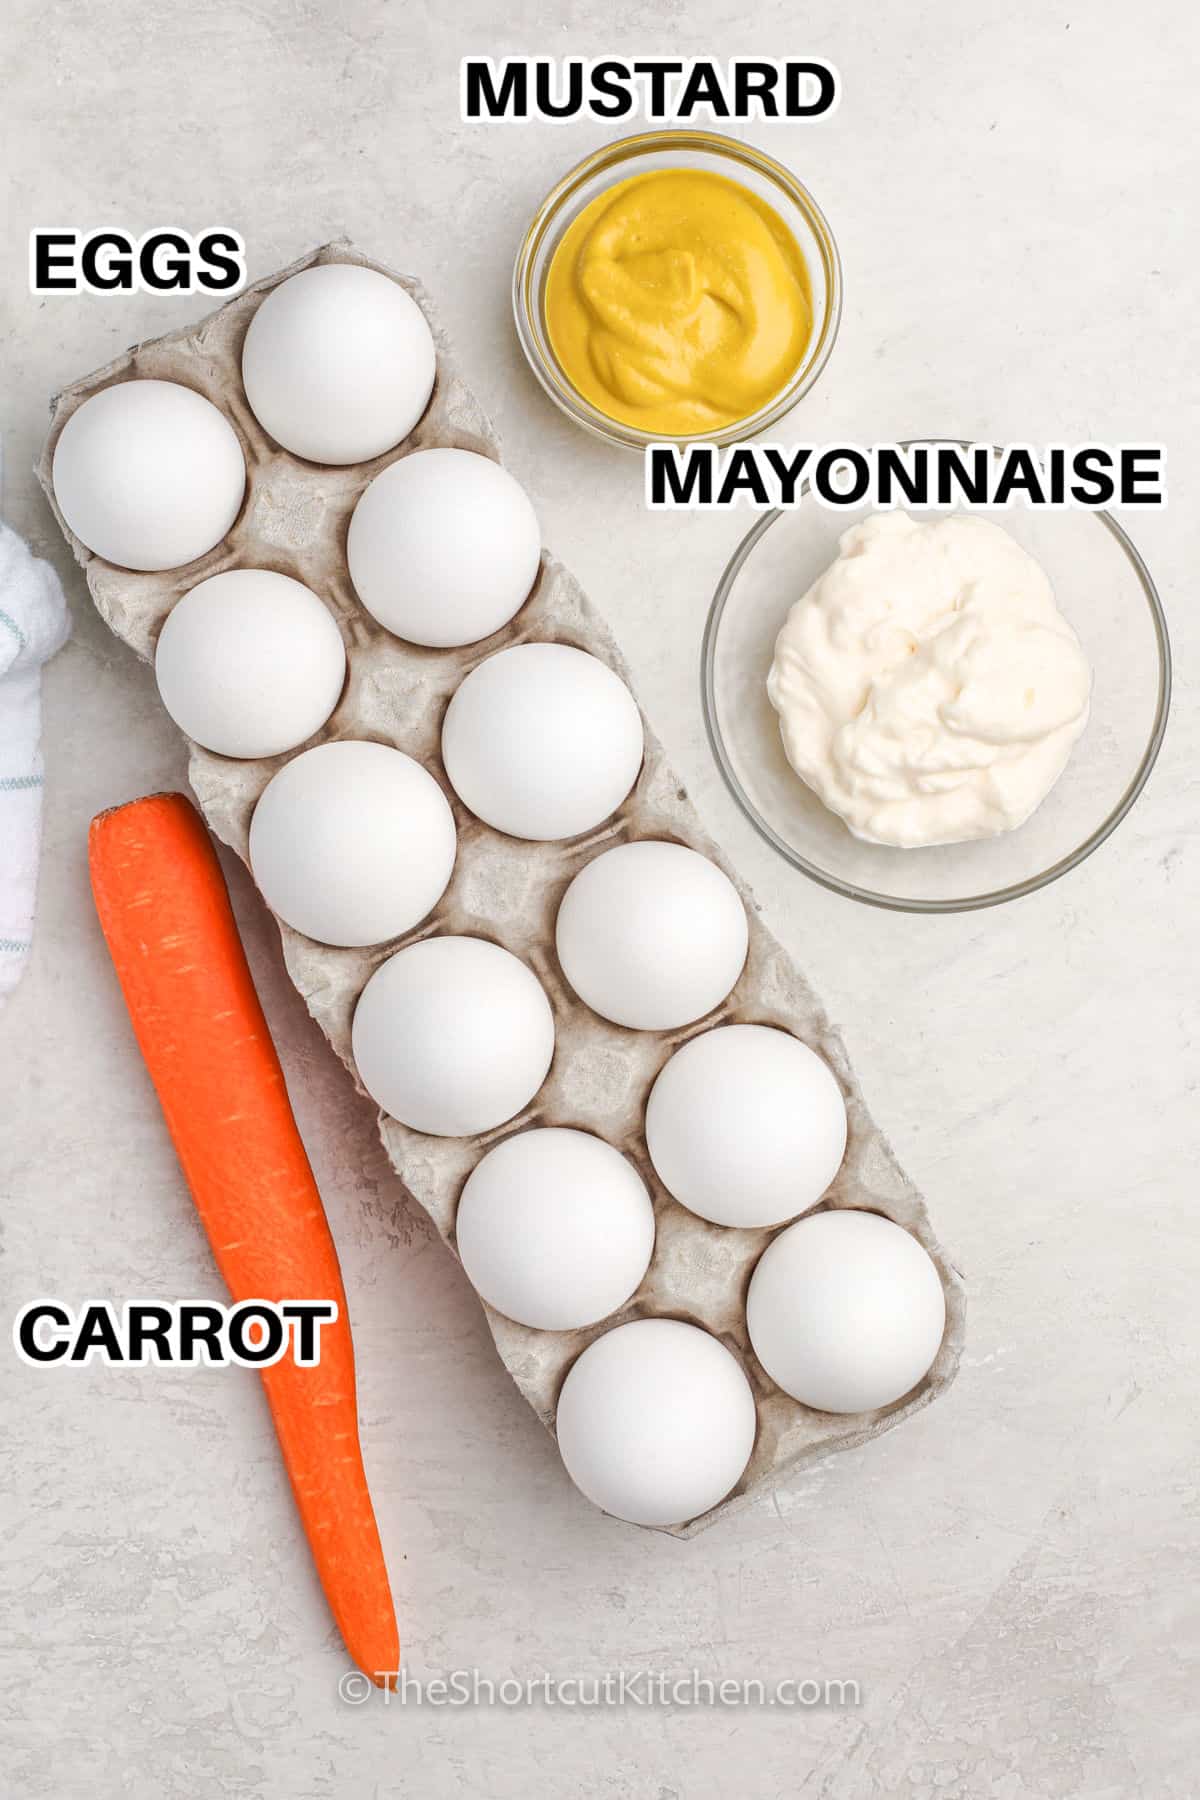 carrot , eggs , mustard and mayonnaise with labels to make Deviled Egg Chicks